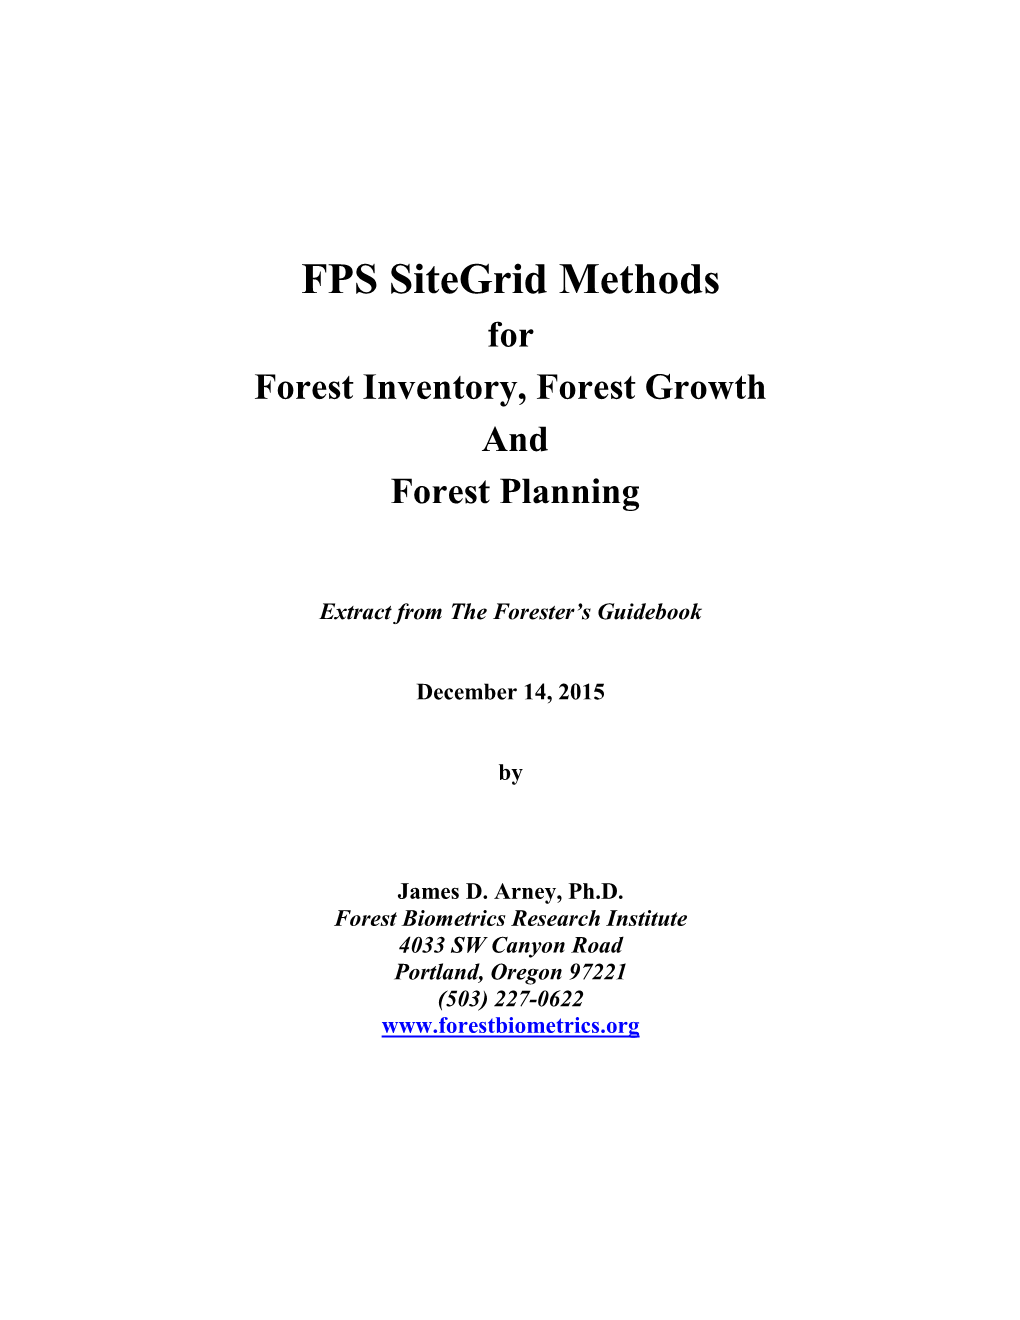 FPS Sitegrid Methods for Forest Inventory, Forest Growth and Forest Planning